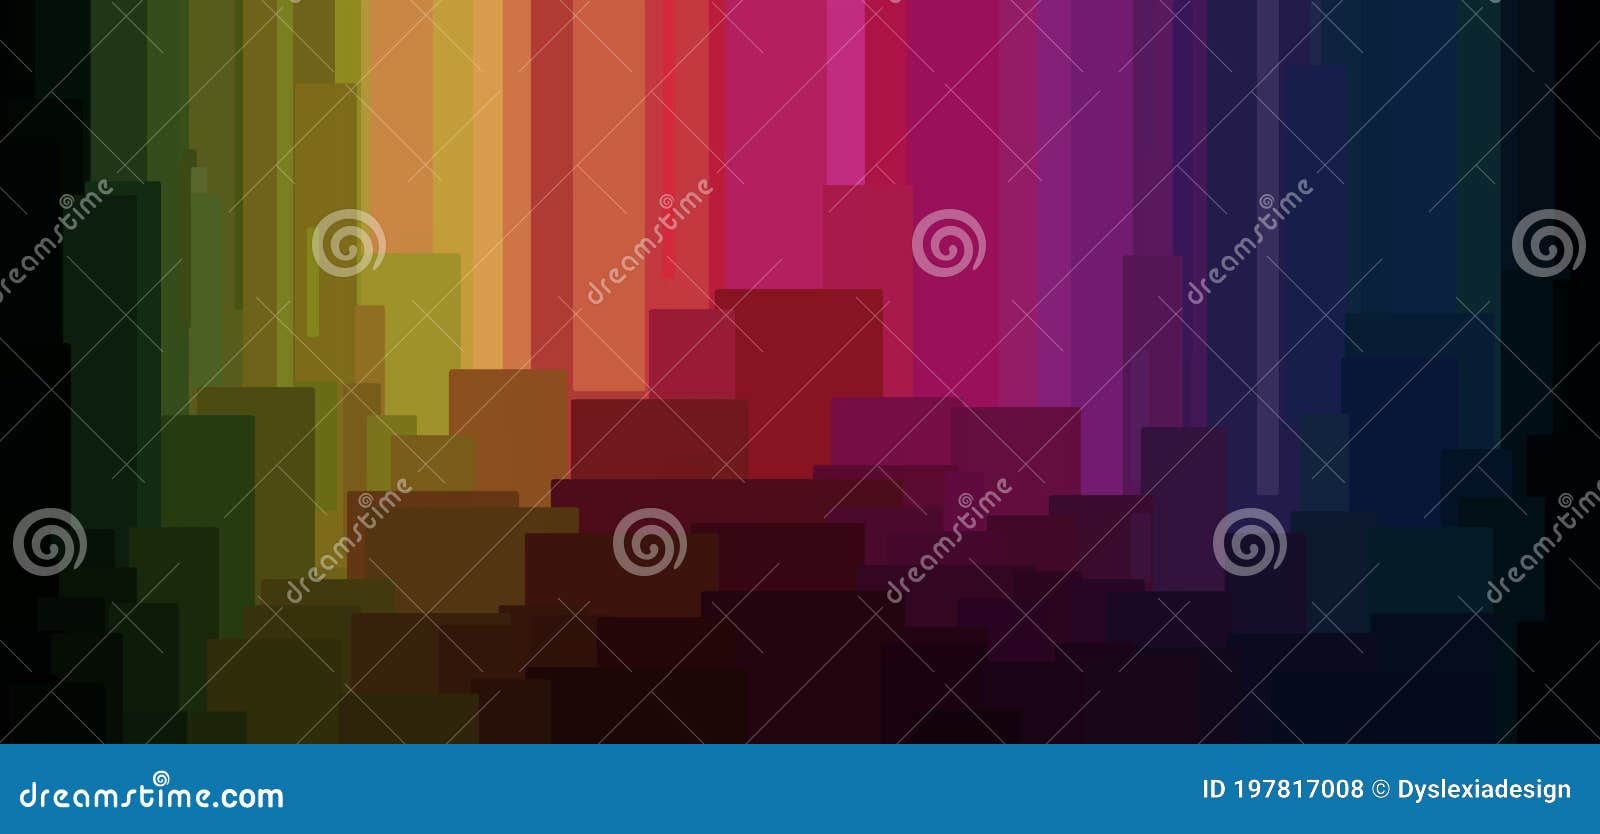 abstract background of lgbt skyline city